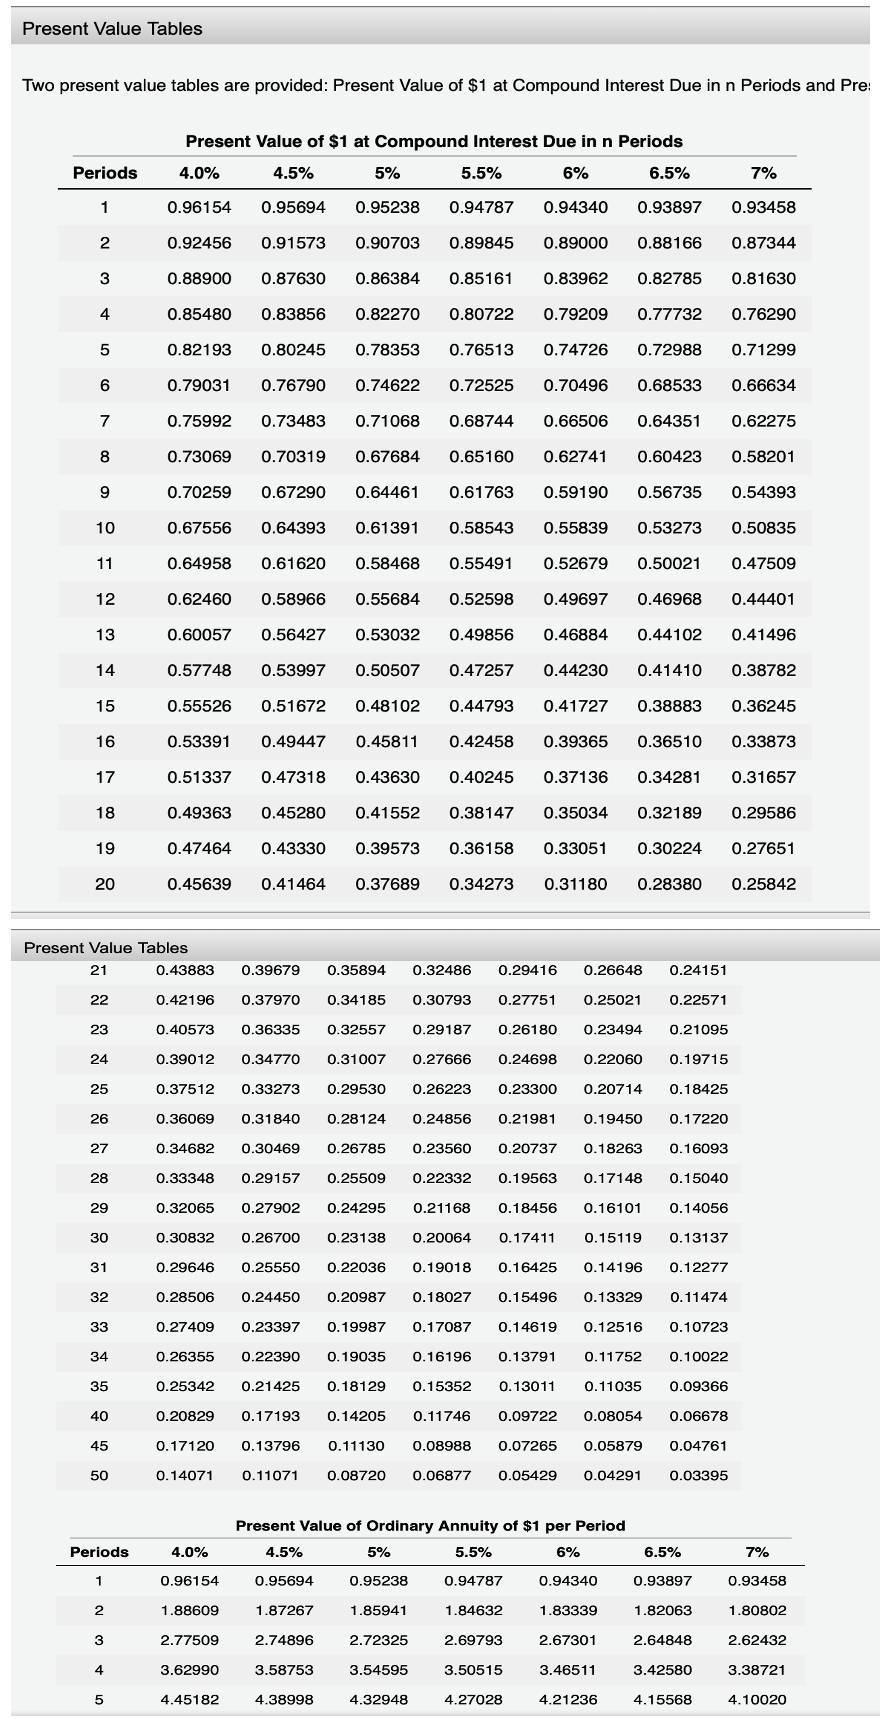 Present Value Tables
Two present value tables are provided: Present Value of $1 at Compound Interest Due in n Periods and Pre:
Present Value of $1 at Compound Interest Due in n Periods
Periods
4.0%
4.5%
5%
5.5%
6%
6.5%
7%
1
0.96154
0.95694
0.95238
0.94787
0.94340
0.93897
0.93458
0.92456
0.91573
0.90703
0.89845
0.89000
0.88166
0.87344
3
0.88900
0.87630
0.86384
0.85161
0.83962
0.82785
0.81630
4
0.85480
0.83856
0.82270
0.80722
0.79209
0.77732
0.76290
5
0.82193
0.80245
0.78353
0.76513
0.74726
0.72988
0.71299
0.79031
0.76790
0.74622
0.72525
0.70496
0.68533
0.66634
7
0.75992
0.73483
0.71068
0.68744
0.66506
0.64351
0.62275
8
0.73069
0.70319
0.67684
0.65160
0.62741
0.60423
0.58201
9
0.70259
0.67290
0.64461
0.61763
0.59190
0.56735
0.54393
10
0.67556
0.64393
0.61391
0.58543
0.55839
0.53273
0.50835
11
0.64958
0.61620
0.58468
0.55491
0.52679
0.50021
0.47509
12
0.62460
0.58966
0.55684
0.52598
0.49697
0.46968
0.44401
13
0.60057
0.56427
0.53032
0.49856
0.46884
0.44102
0.41496
14
0.57748
0.53997
0.50507
0.47257
0.44230
0.41410
0.38782
15
0.55526
0.51672
0.48102
0.44793
0.41727
0.38883
0.36245
16
0.53391
0.49447
0.45811
0.42458
0.39365
0.36510
0.33873
17
0.51337
0.47318
0.43630
0.40245
0.37136
0.34281
0.31657
18
0.49363
0.45280
0.41552
0.38147
0.35034
0.32189
0.29586
19
0.47464
0.43330
0.39573
0.36158
0.33051
0.30224
0.27651
20
0.45639
0.41464
0.37689
0.34273
0.31180
0.28380
0.25842
Present Value Tables
21
0.43883
0,39679
0.35894
0.32486
0.29416
0.26648
0.24151
22
0.42196
0.37970
0.34185
0.30793
0.27751
0.25021
0.22571
23
0.40573
0.36335
0.32557
0.29187
0.26180
0.23494
0.21095
24
0.39012
0,34770
0.31007
0.27666
0.24698
0.22060
0.19715
25
0.37512
0.33273
0.29530
0.26223
0.23300
0.20714
0.18425
26
0.36069
0.31840
0.28124
0.24856
0.21981
0.19450
0.17220
27
0.34682
0.30469
0.26785
0.23560
0.20737
0.18263
0.16093
28
0.33348
0.29157
0.25509
0.22332
0.19563
0.17148
0.15040
29
0.32065
0.27902
0.24295
0.21168
0.18456
0.16101
0.14056
30
0.30832
0.26700
0.23138
0.20064
0.17411
0.15119
0.13137
31
0.29646
0.25550
0.22036
0.19018
0.16425
0.14196
0.12277
32
0.28506
0.24450
0.20987
0.18027
0.15496
0.13329
0.11474
33
0.27409
0.23397
0.19987
0.17087
0.14619
0.12516
0.10723
34
0.26355
0.22390
0.19035
0.16196
0.13791
0.11752
0.10022
35
0.25342
0.21425
0.18129
0.15352
0.13011
0.11035
0.09366
40
0.20829
0.17193
0.14205
0.11746
0.09722
0.08054
0.06678
45
0.17120
0.13796
0.11130
0.08988
0.07265
0.05879
0.04761
50
0.14071
0.11071
0.08720
0.06877
0.05429
0.04291
0.03395
Present Value of Ordinary Annuity of $1 per Period
Periods
4.0%
4.5%
5%
5.5%
6%
6.5%
7%
1
0.96154
0.95694
0.95238
0.94787
0.94340
0.93897
0.93458
2
1.88609
1.87267
1.85941
1.84632
1.83339
1.82063
1.80802
3
2.77509
2.74896
2.72325
2.69793
2.67301
2.64848
2.62432
3.62990
3.58753
3,54595
3.50515
3.46511
3.42580
3.38721
4.45182
4.38998
4.32948
4.27028
4.21236
4.15568
4.10020
